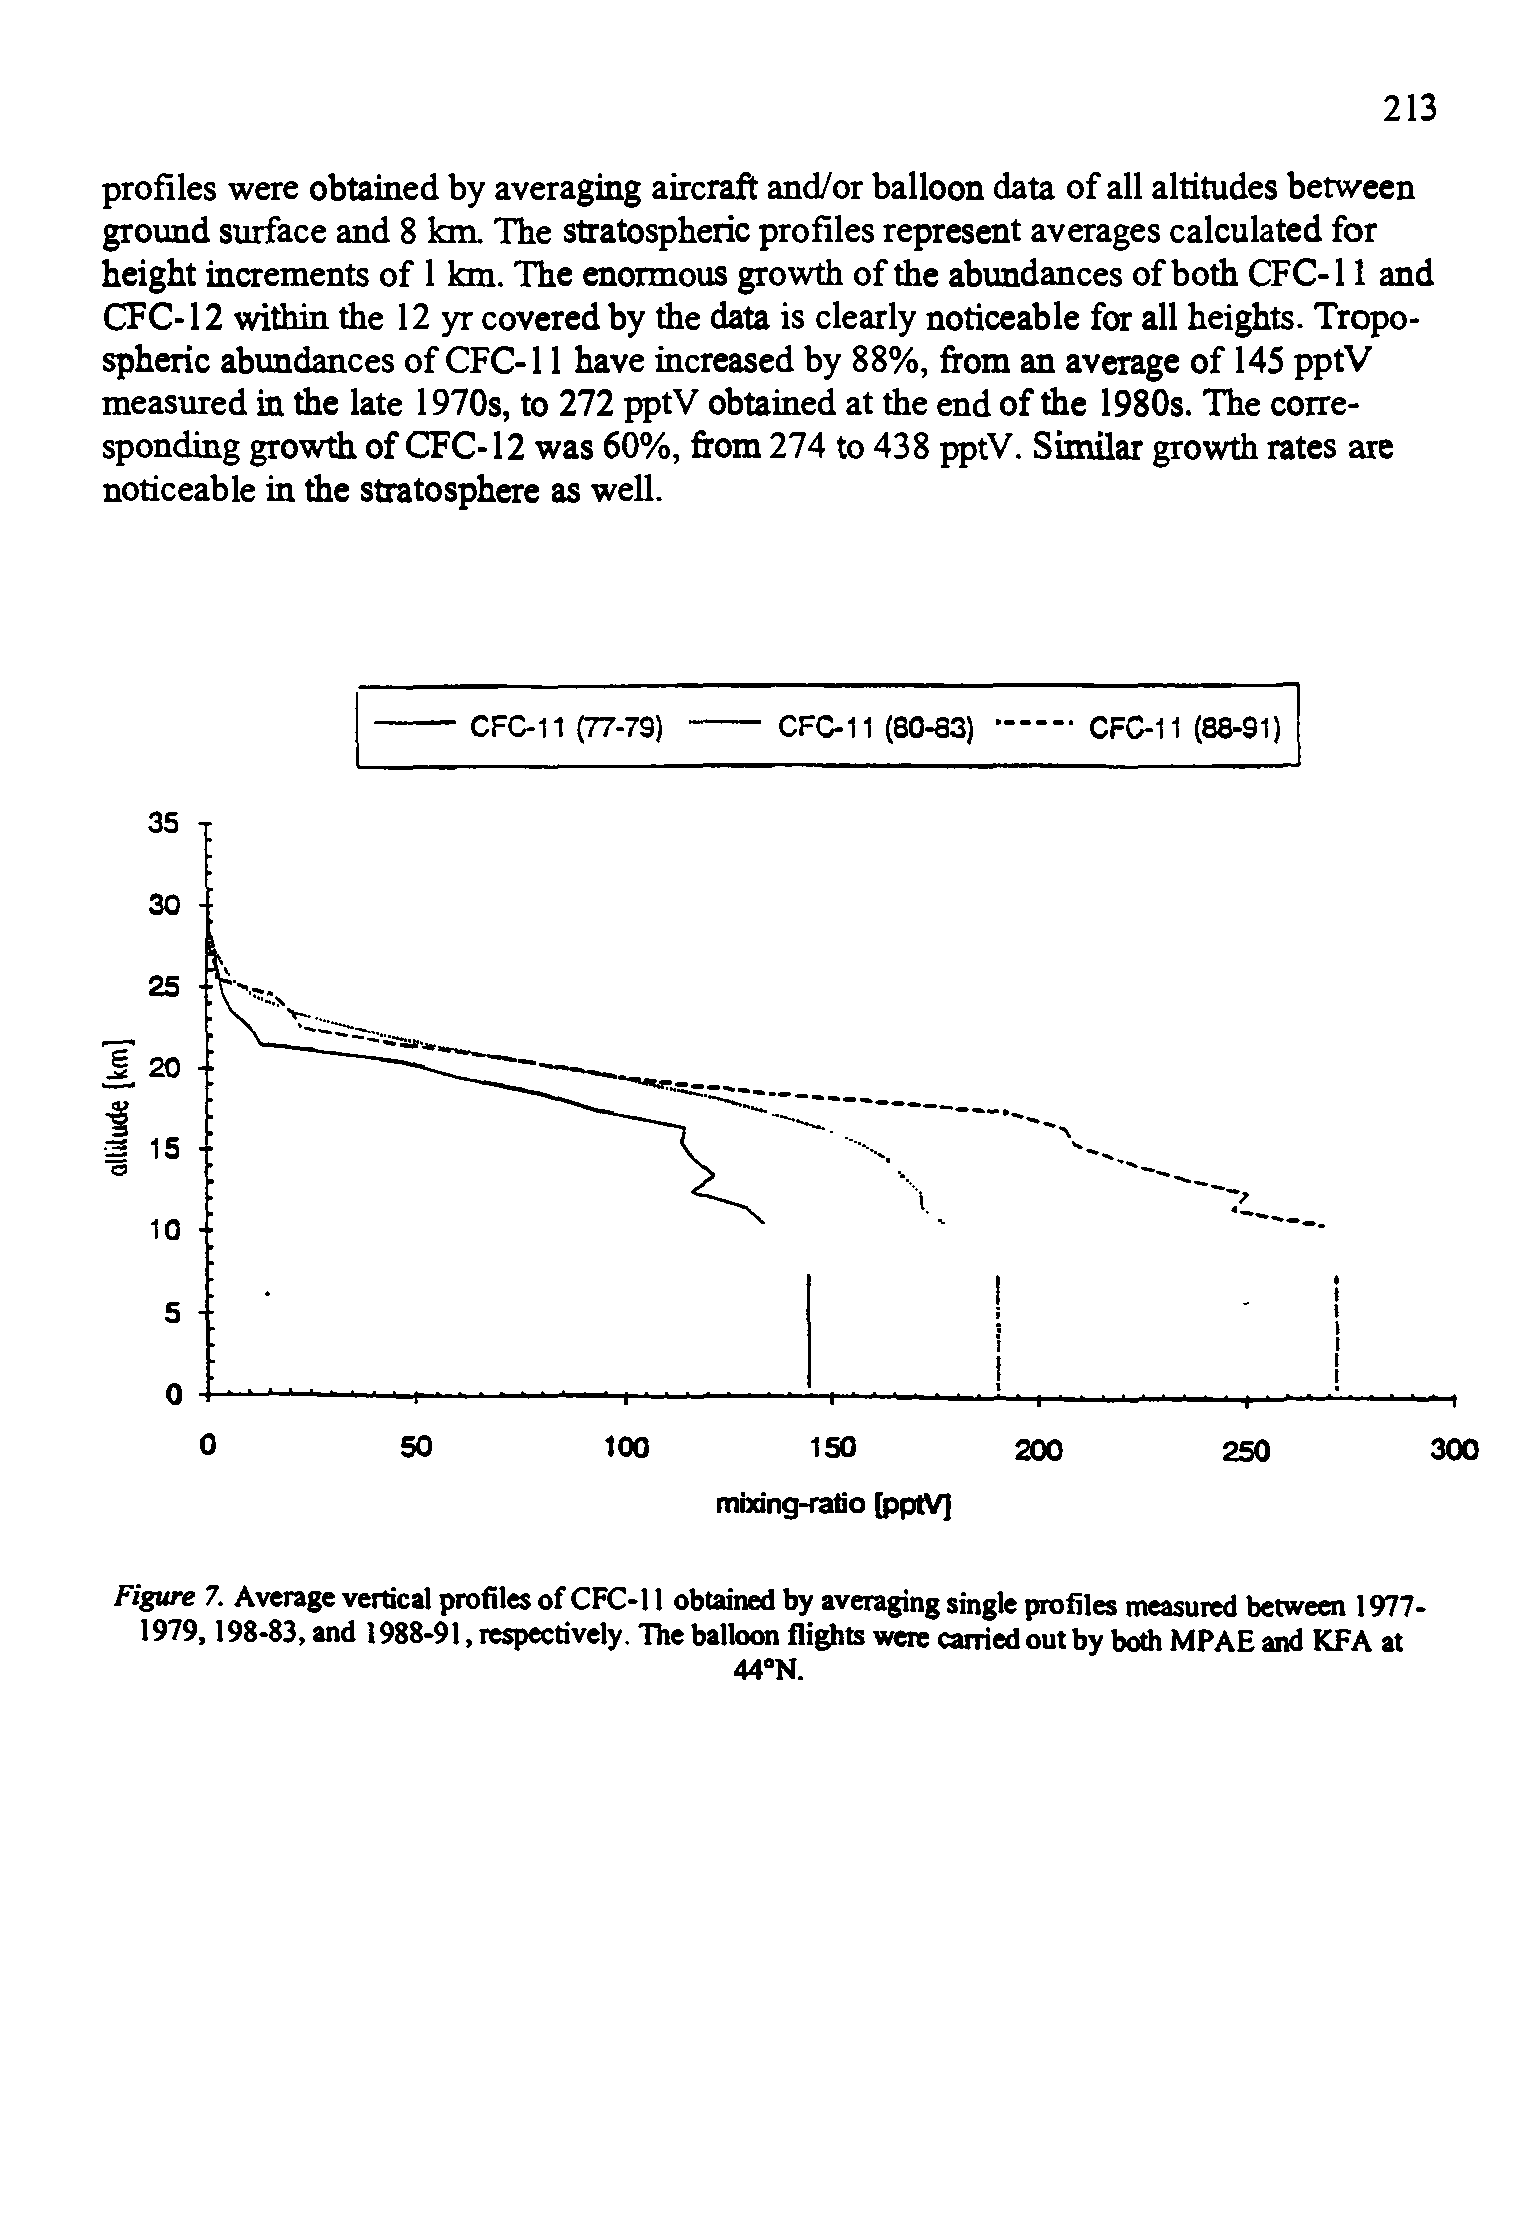 Figure 7. Average vertical profiles of CFC-11 obtained by averaging single profiles measured between 1977-1979,198-83, and 1988-91, respectively. The balloon flights were carried out by both MPAE and KFA at...